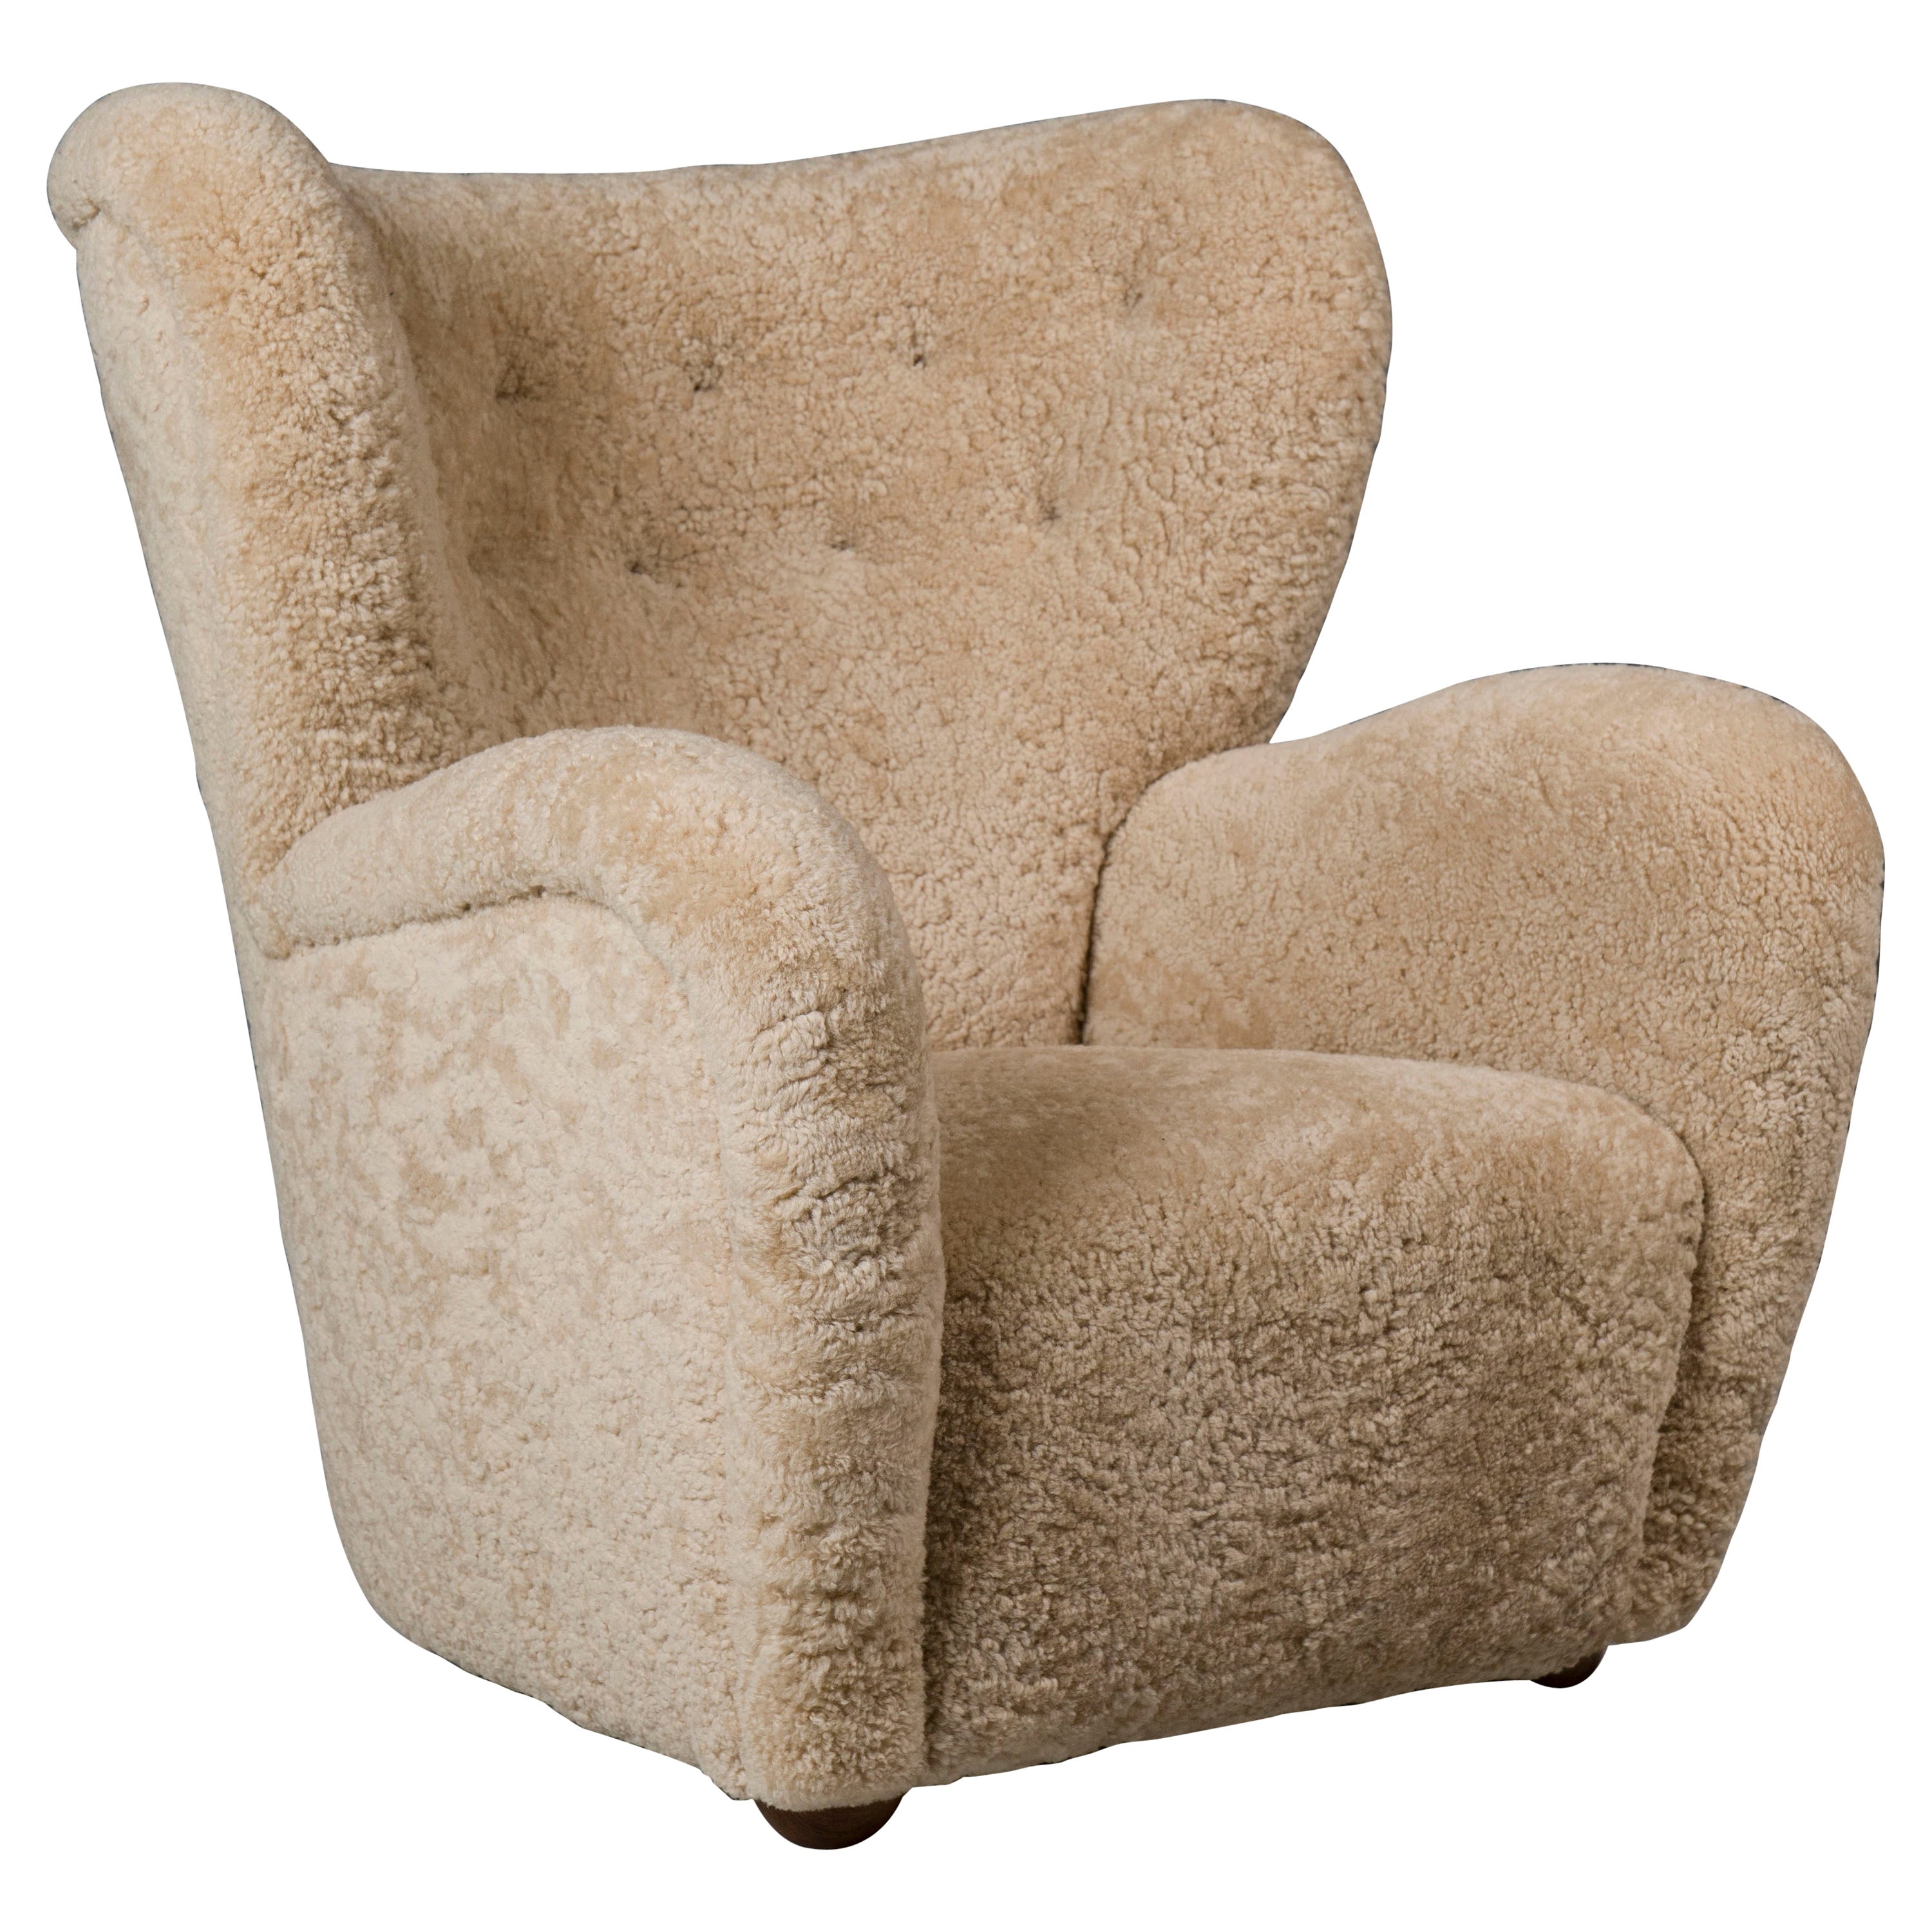 1940s Large Sculptural Swedish Shearling Armchair